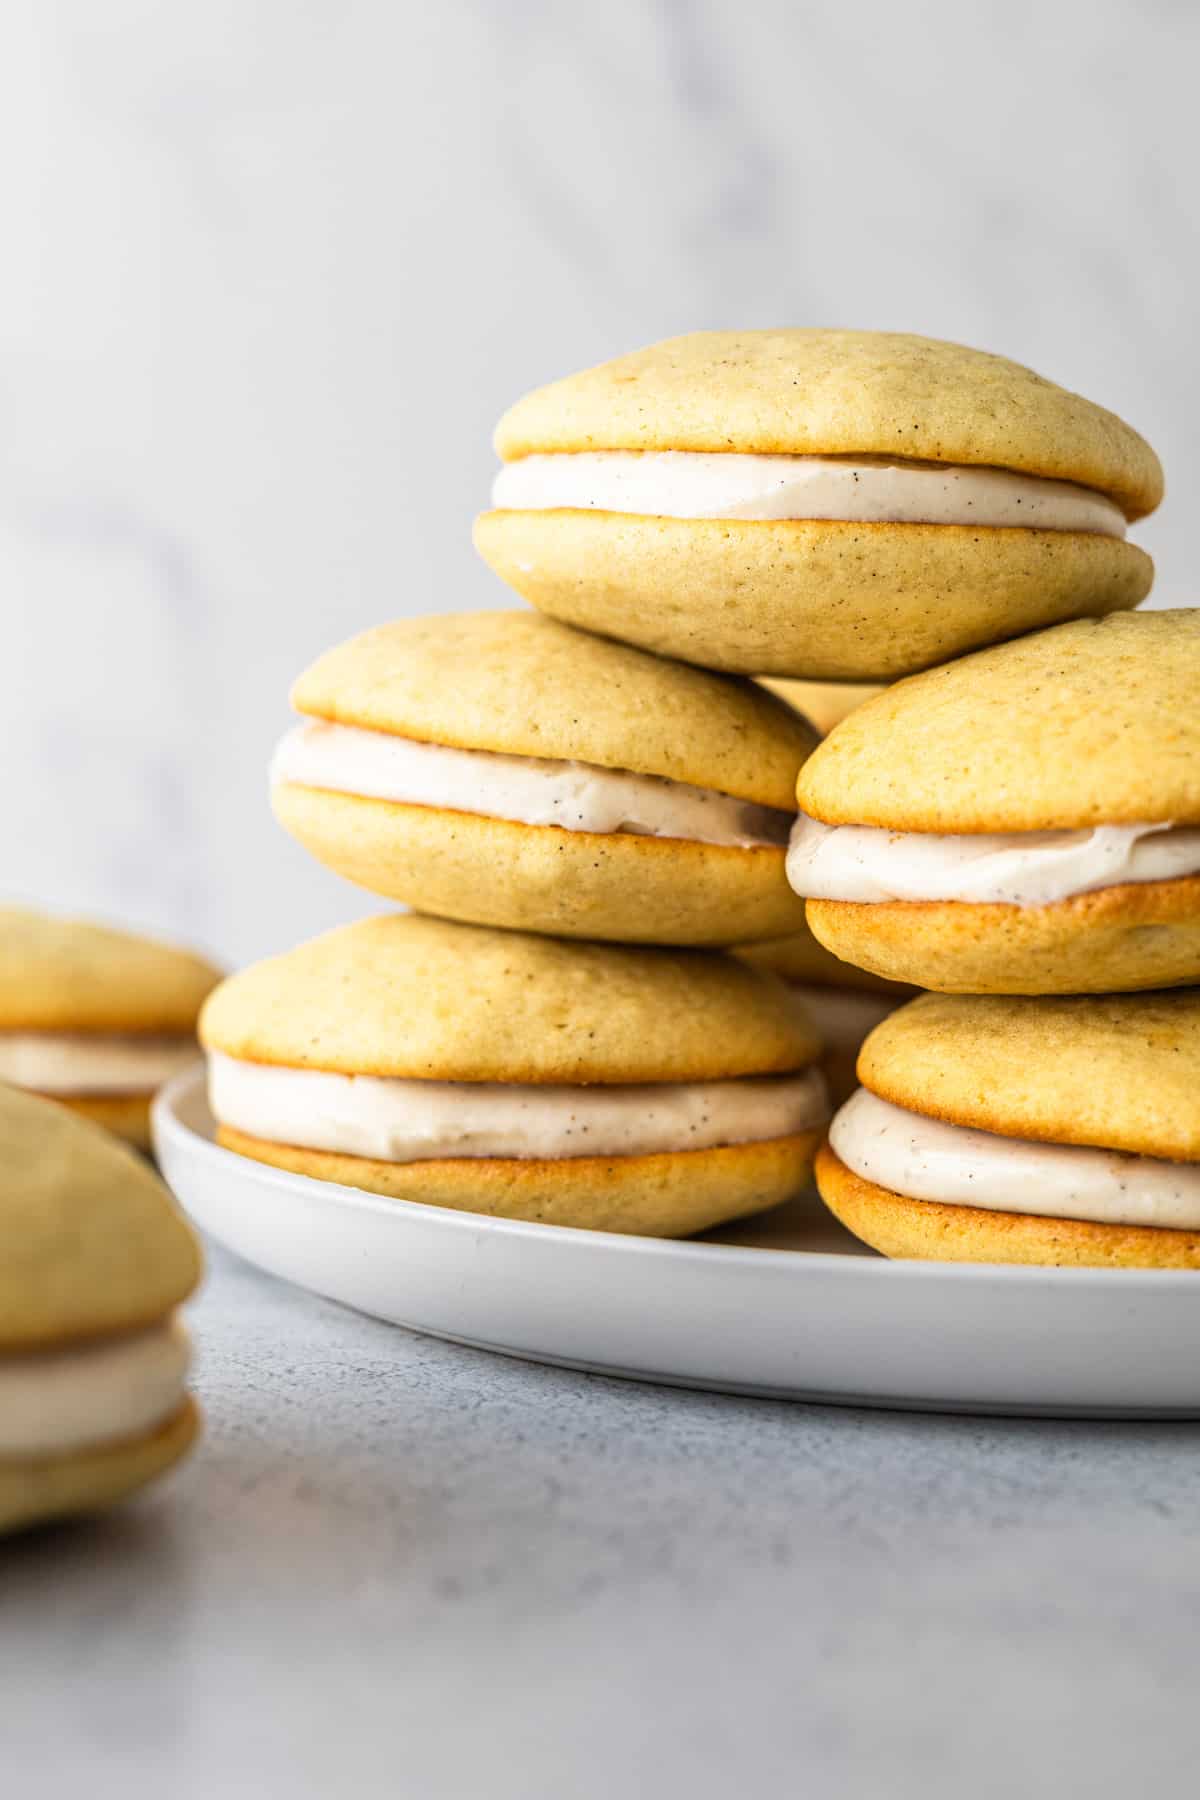 A stack of whoopie pies on a plate.